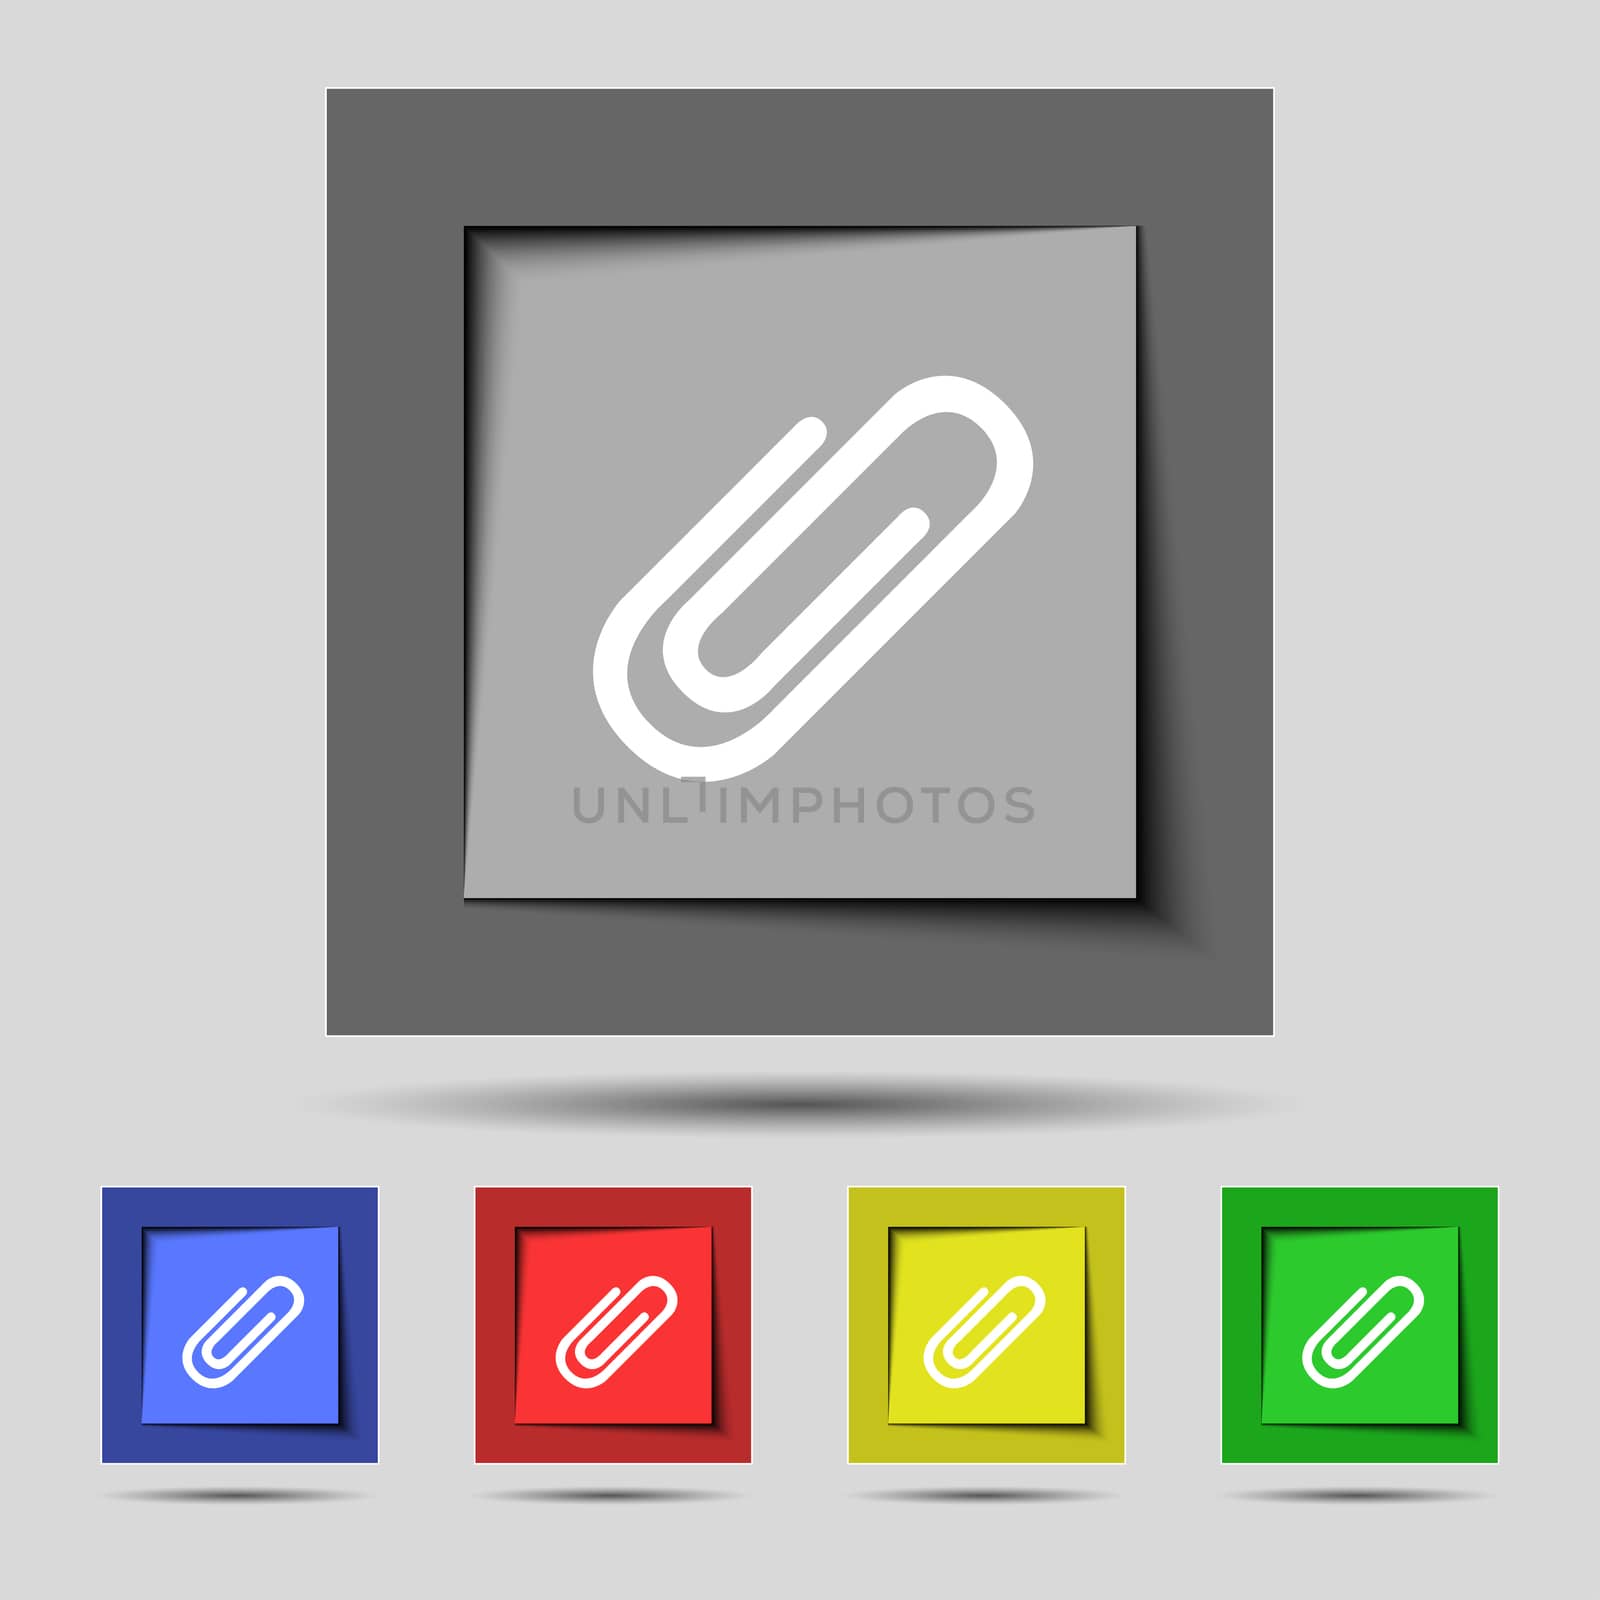 Paper clip sign icon. Clip symbol. Set of colored buttons. illustration